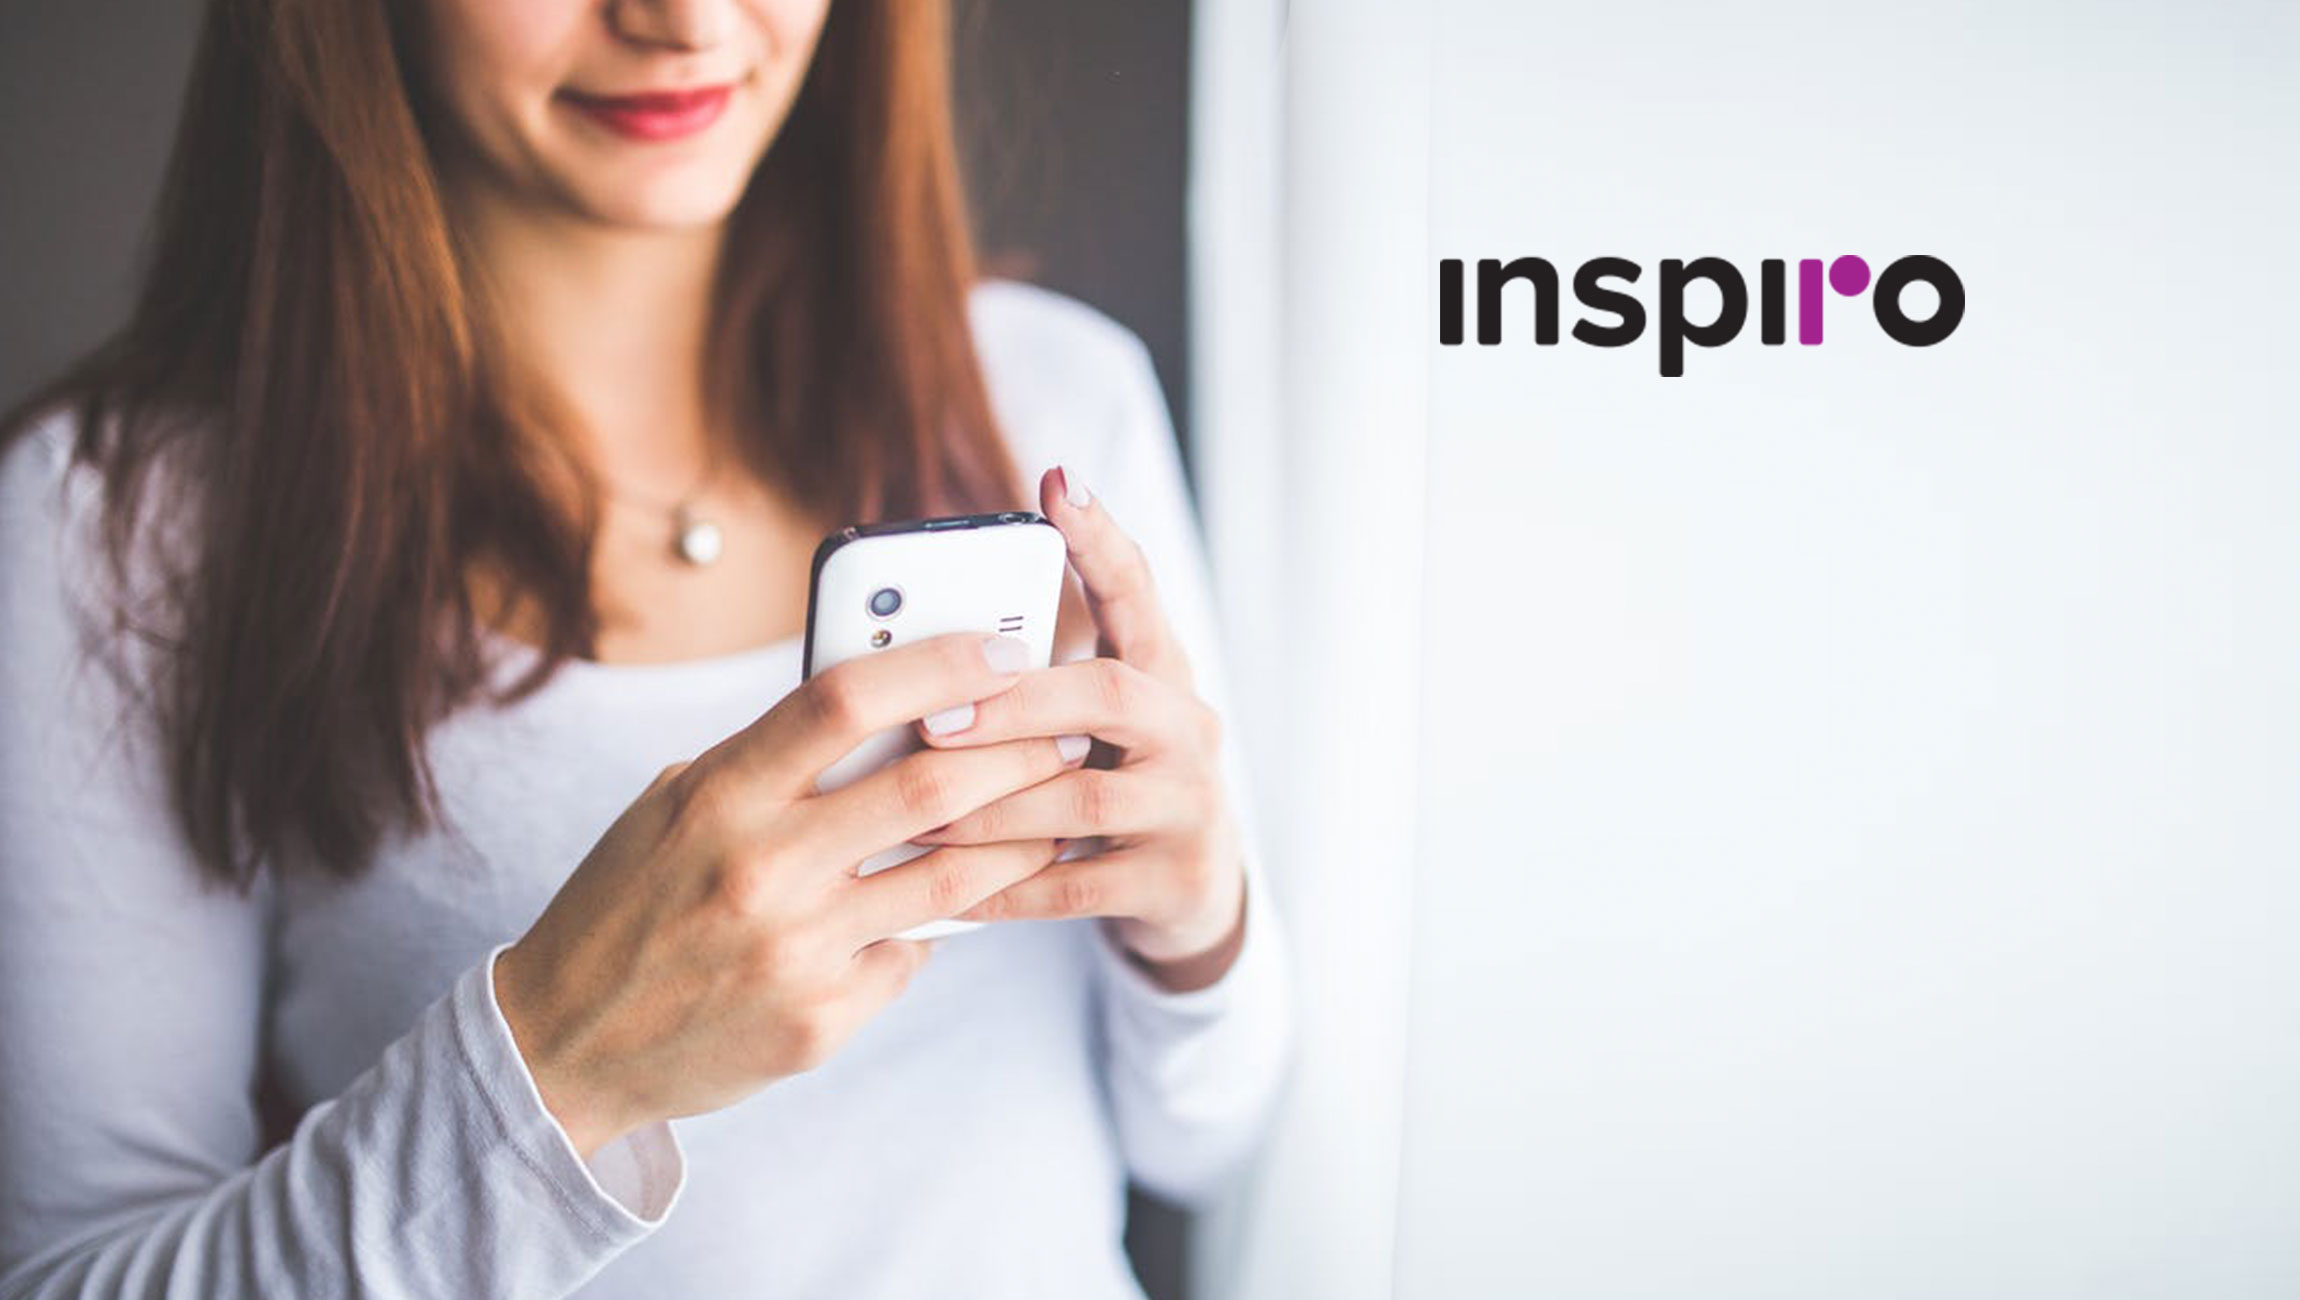 Inspiro invests in a digital candidate experience